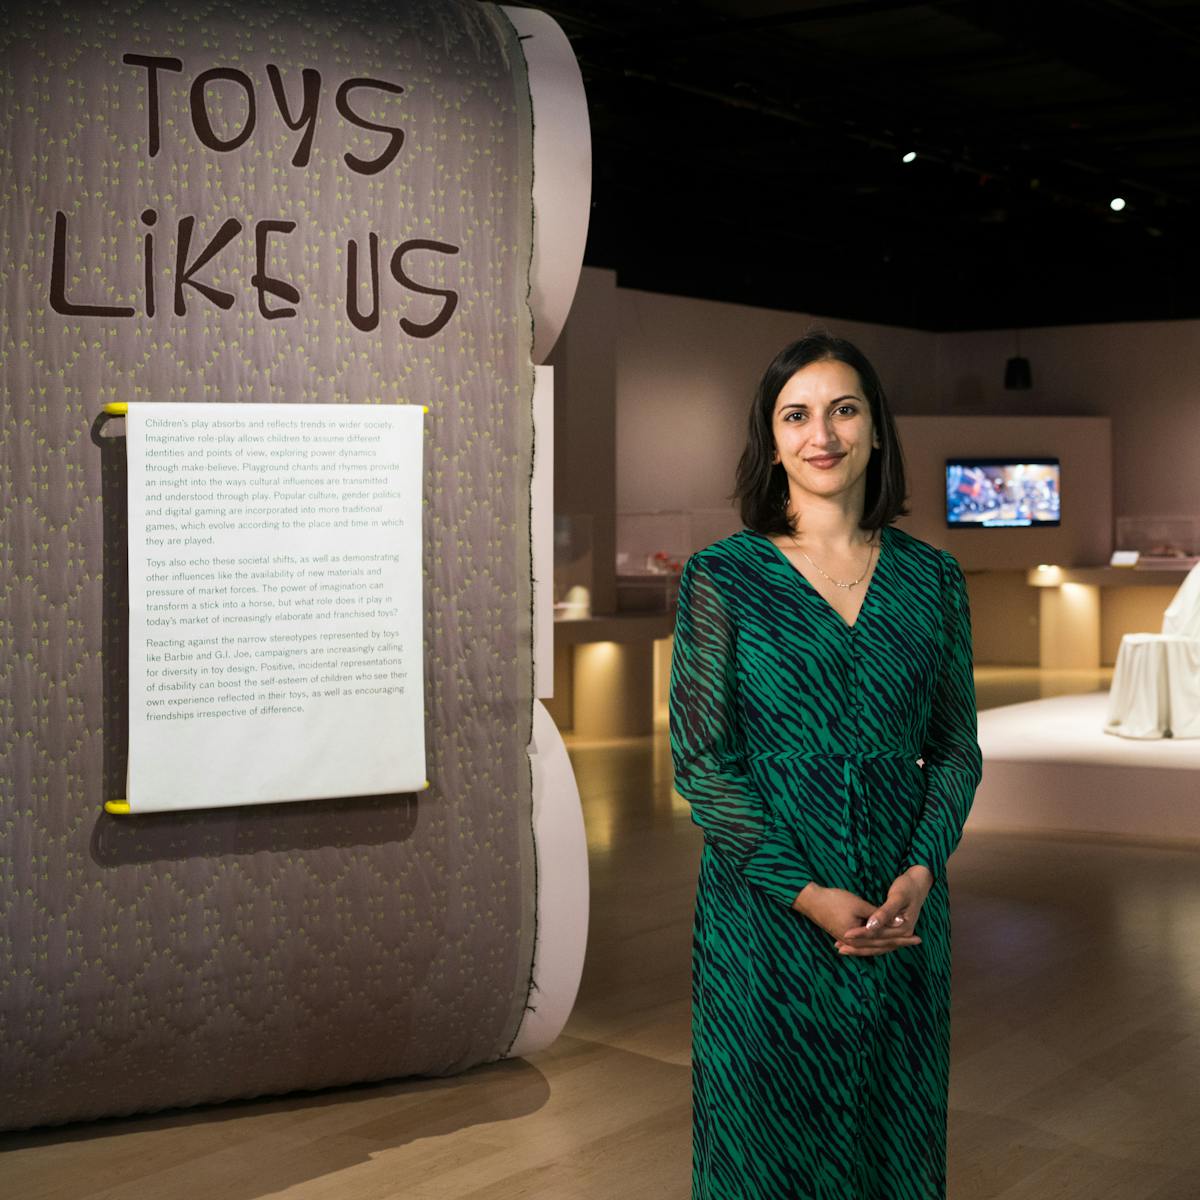 Photograph of a woman standing an exhibition gallery smiling to camera. To the left of her is an exhibition text panel with the title 'Toys Like Us' written above it. In the distance behind her to the right are exhibition exhibits and a tv screen.